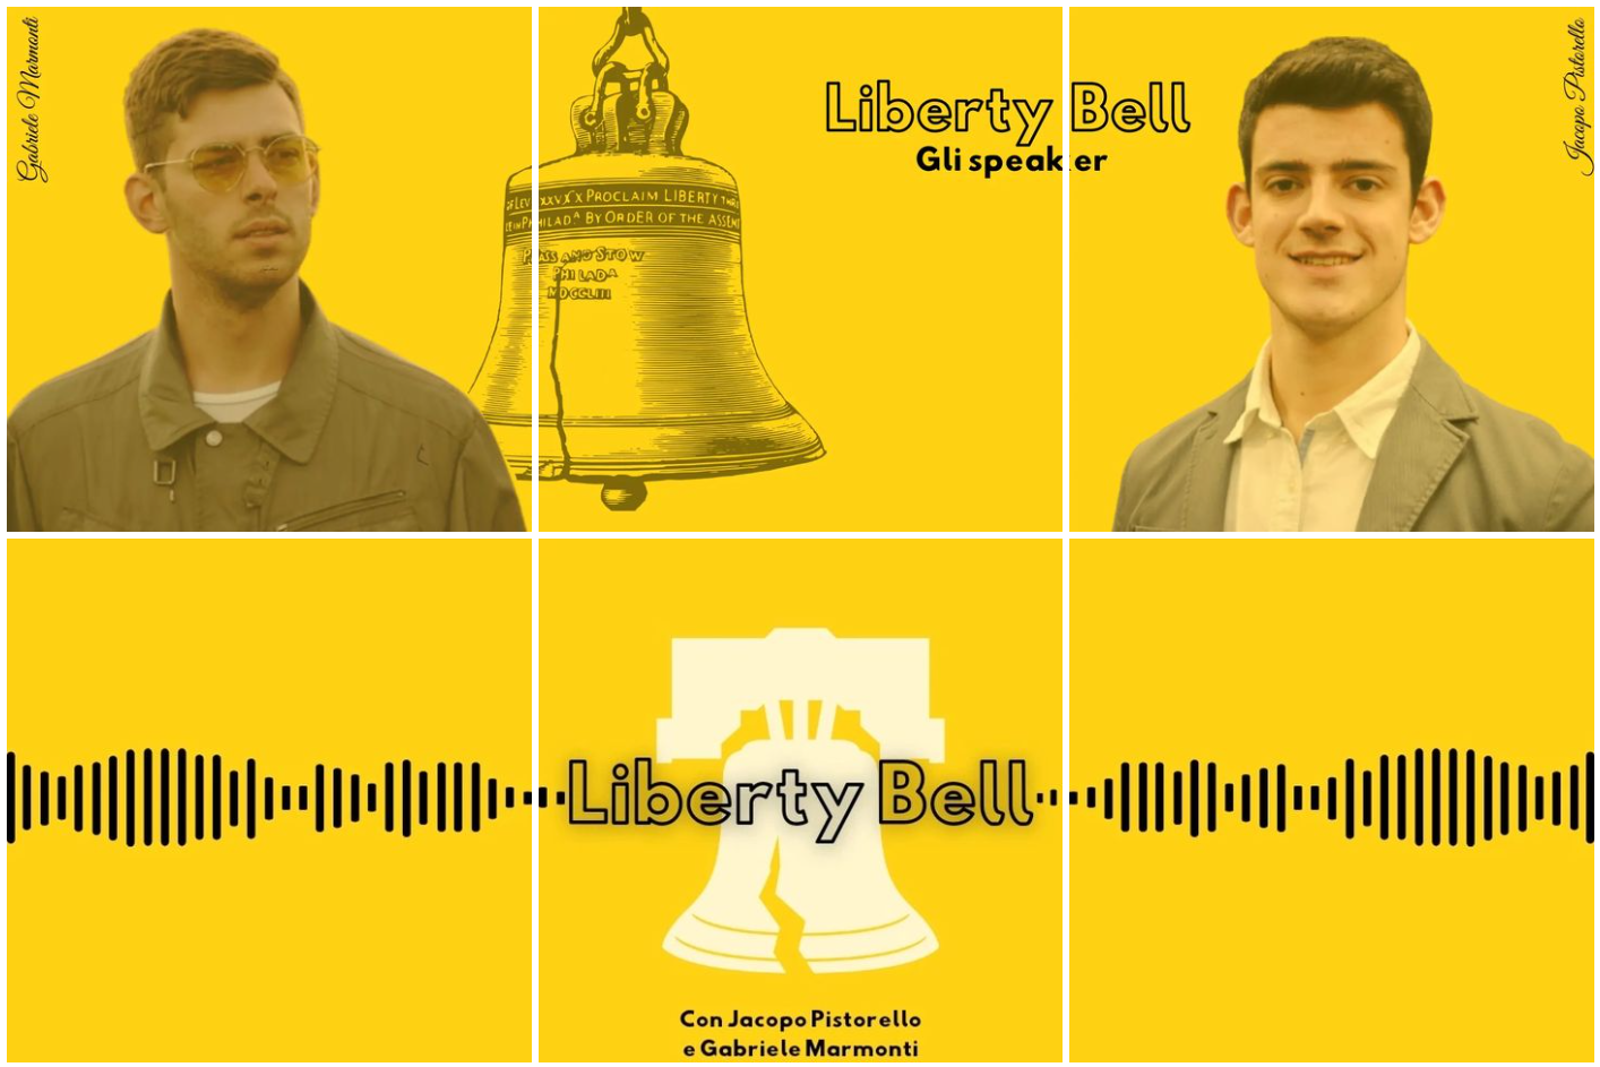 A wave of creativity began in May, when 28 of our students from all around Europe met in Gummersbach, Germany, for our Studio Liberty training, resulting in projects such as the Liberty Bell podcast